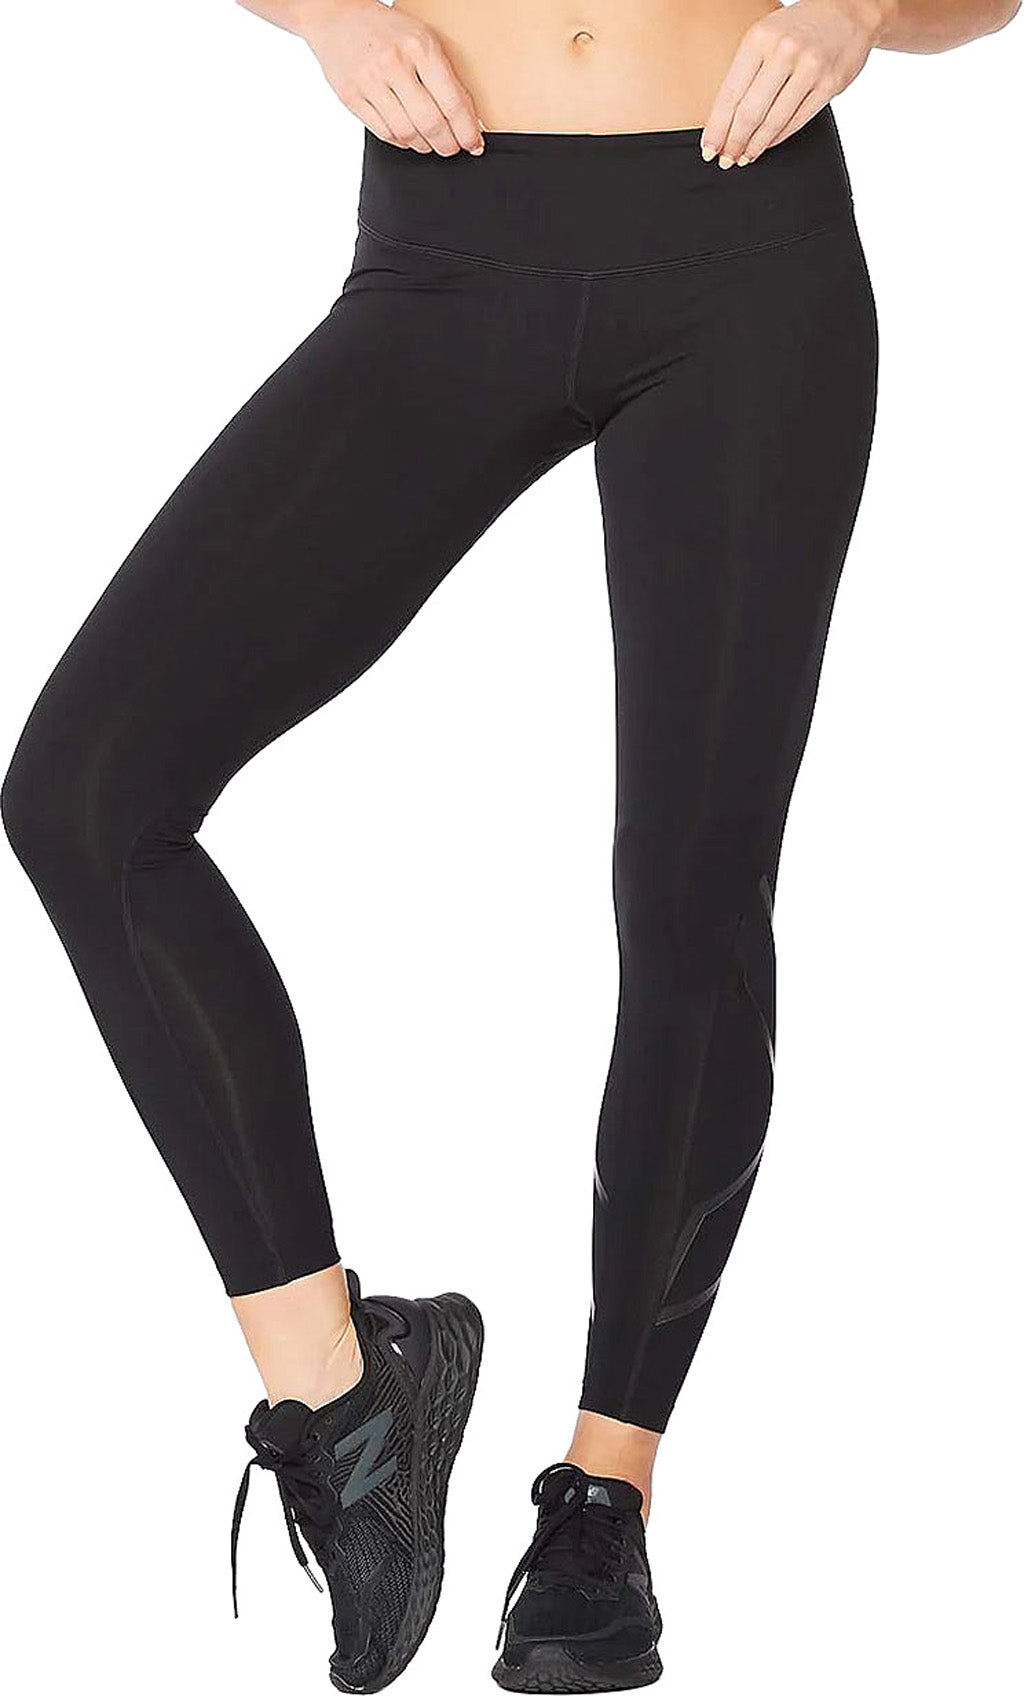 2XU Ignition Mid-Rise Compression Tights - Women's